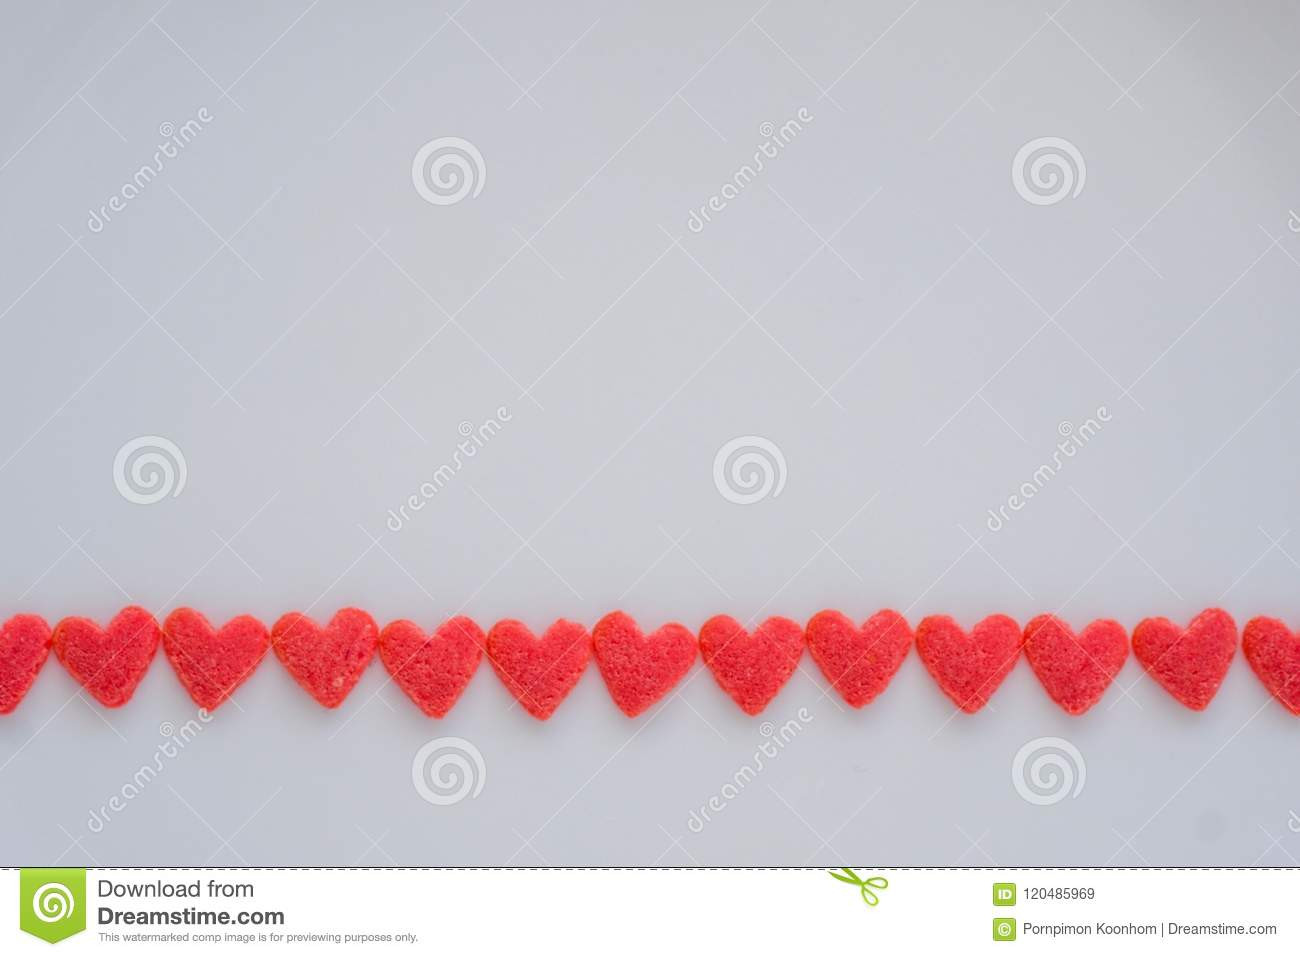 24 attractive Red Heart Shaped Vase 2024 free download red heart shaped vase of row od mini red heart candy on white background stock image image with download row od mini red heart candy on white background stock image image of love